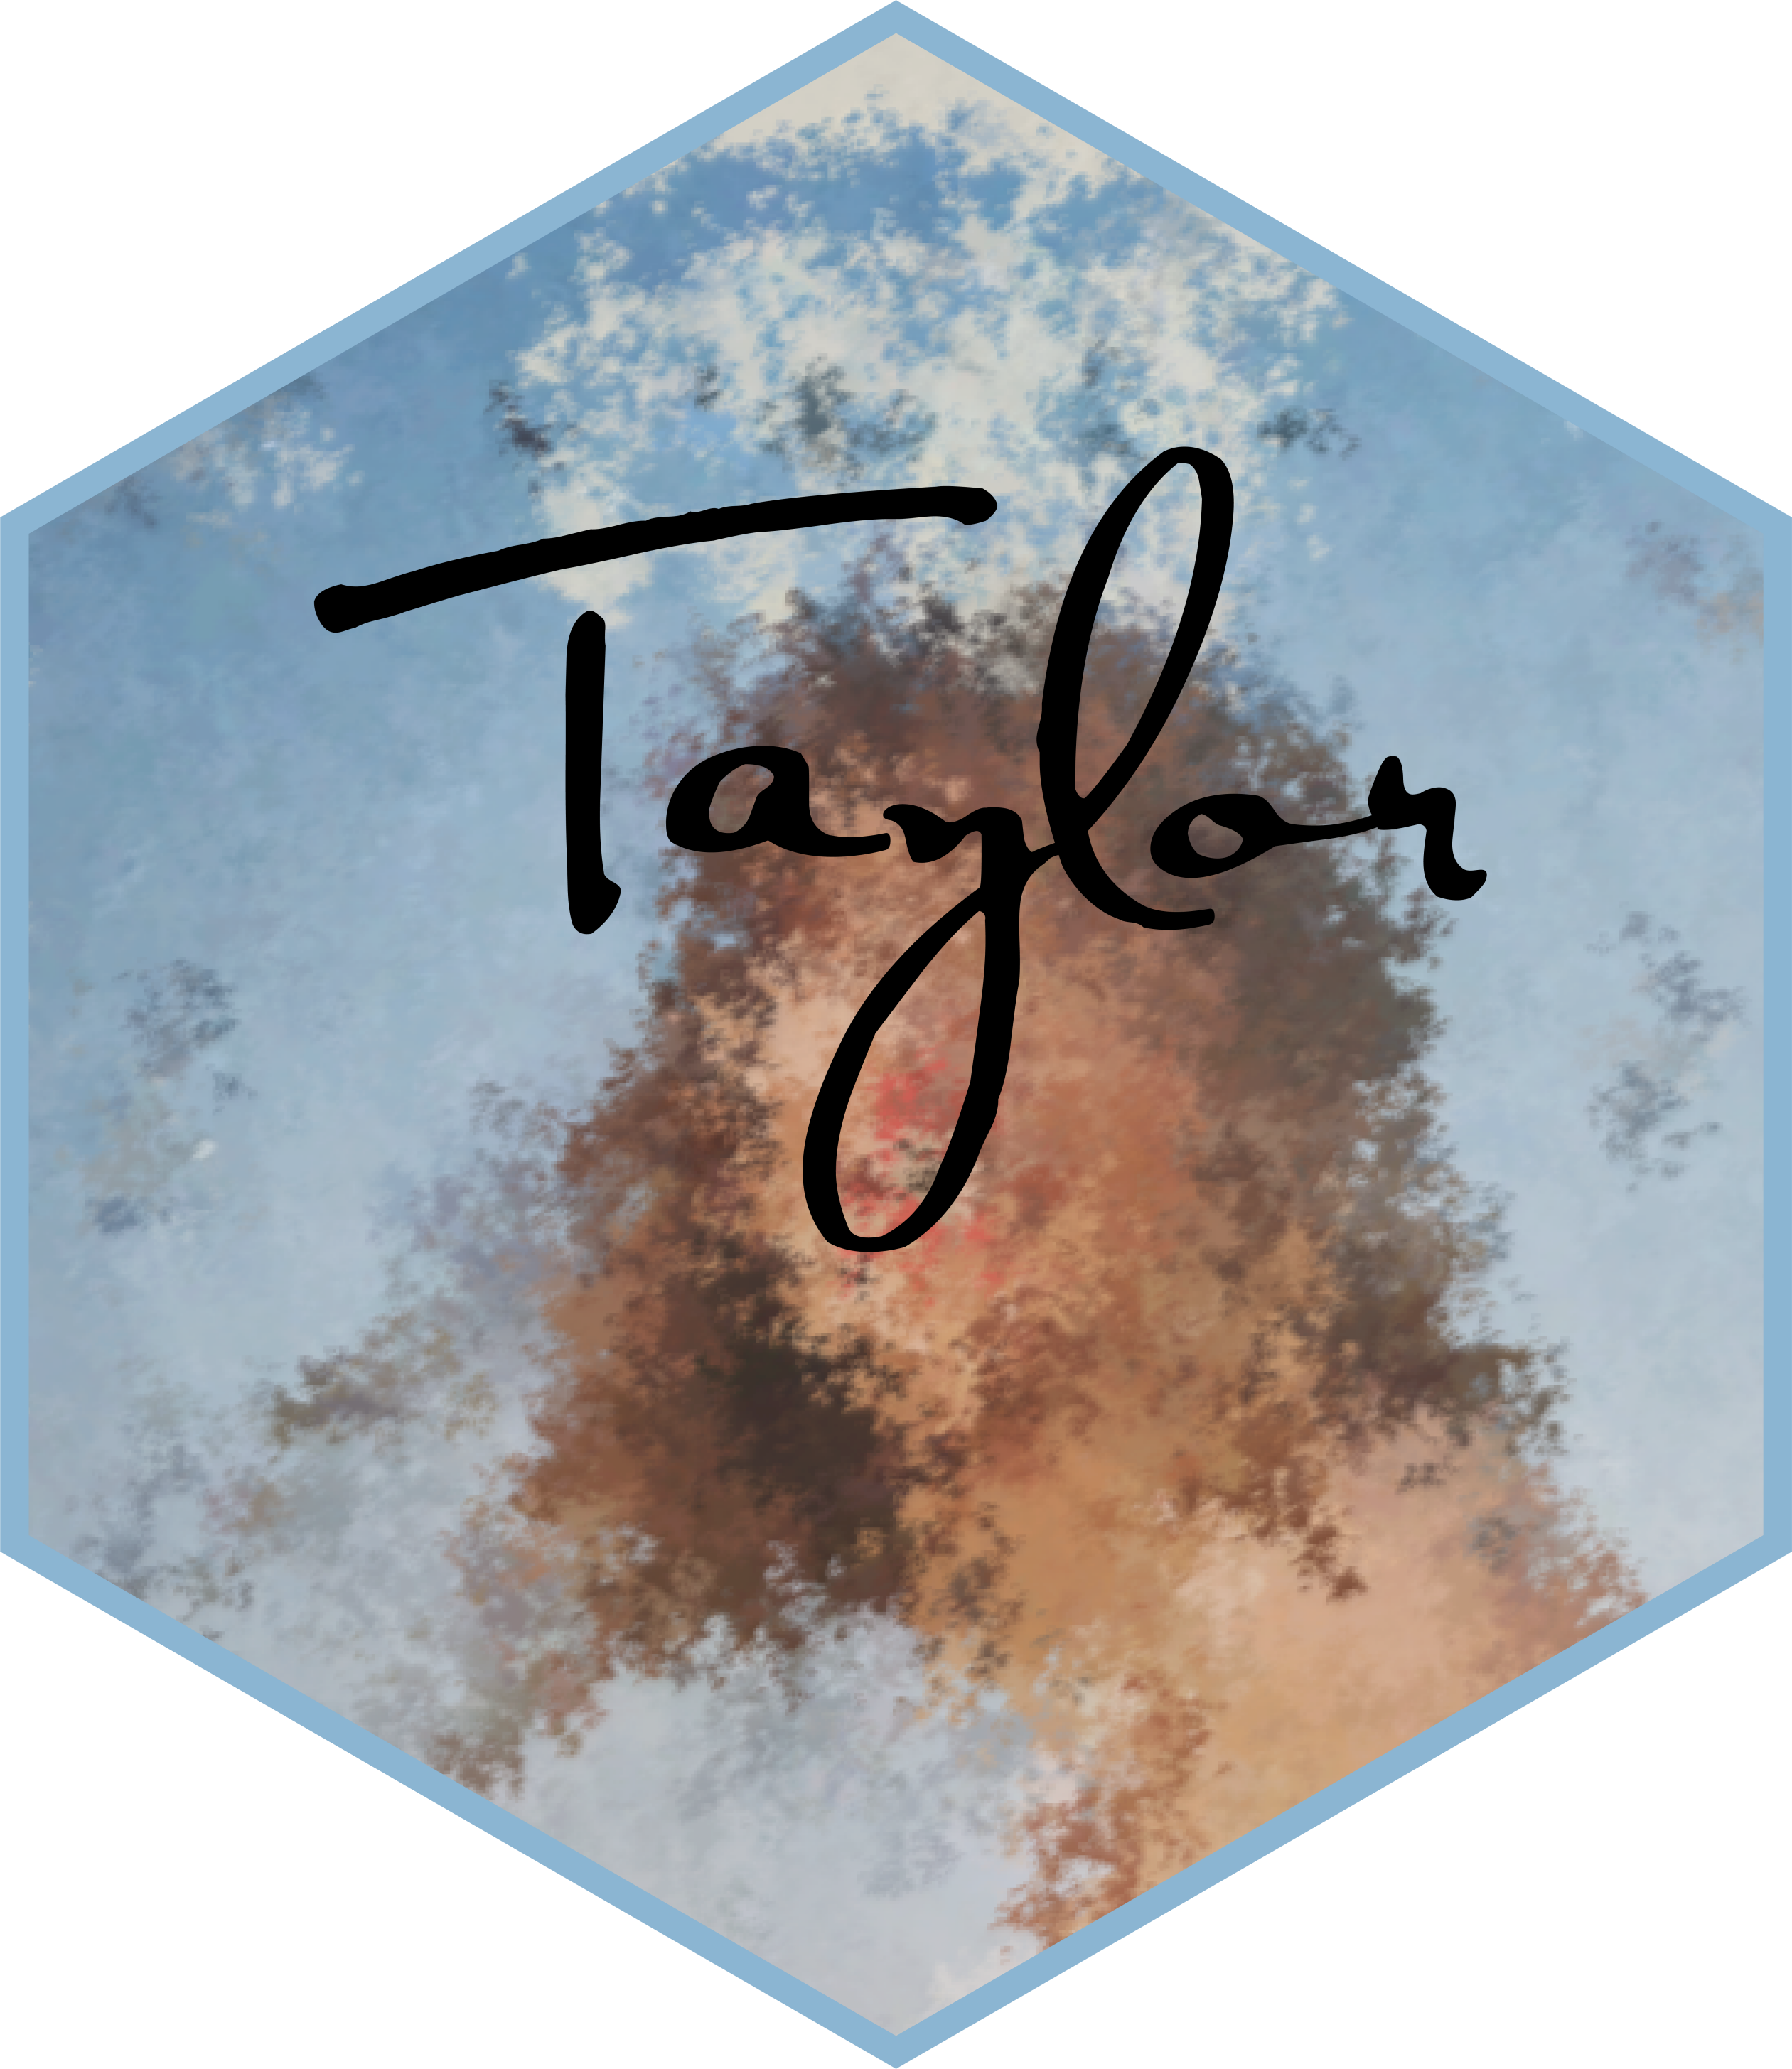 Hex logo for the taylor package.